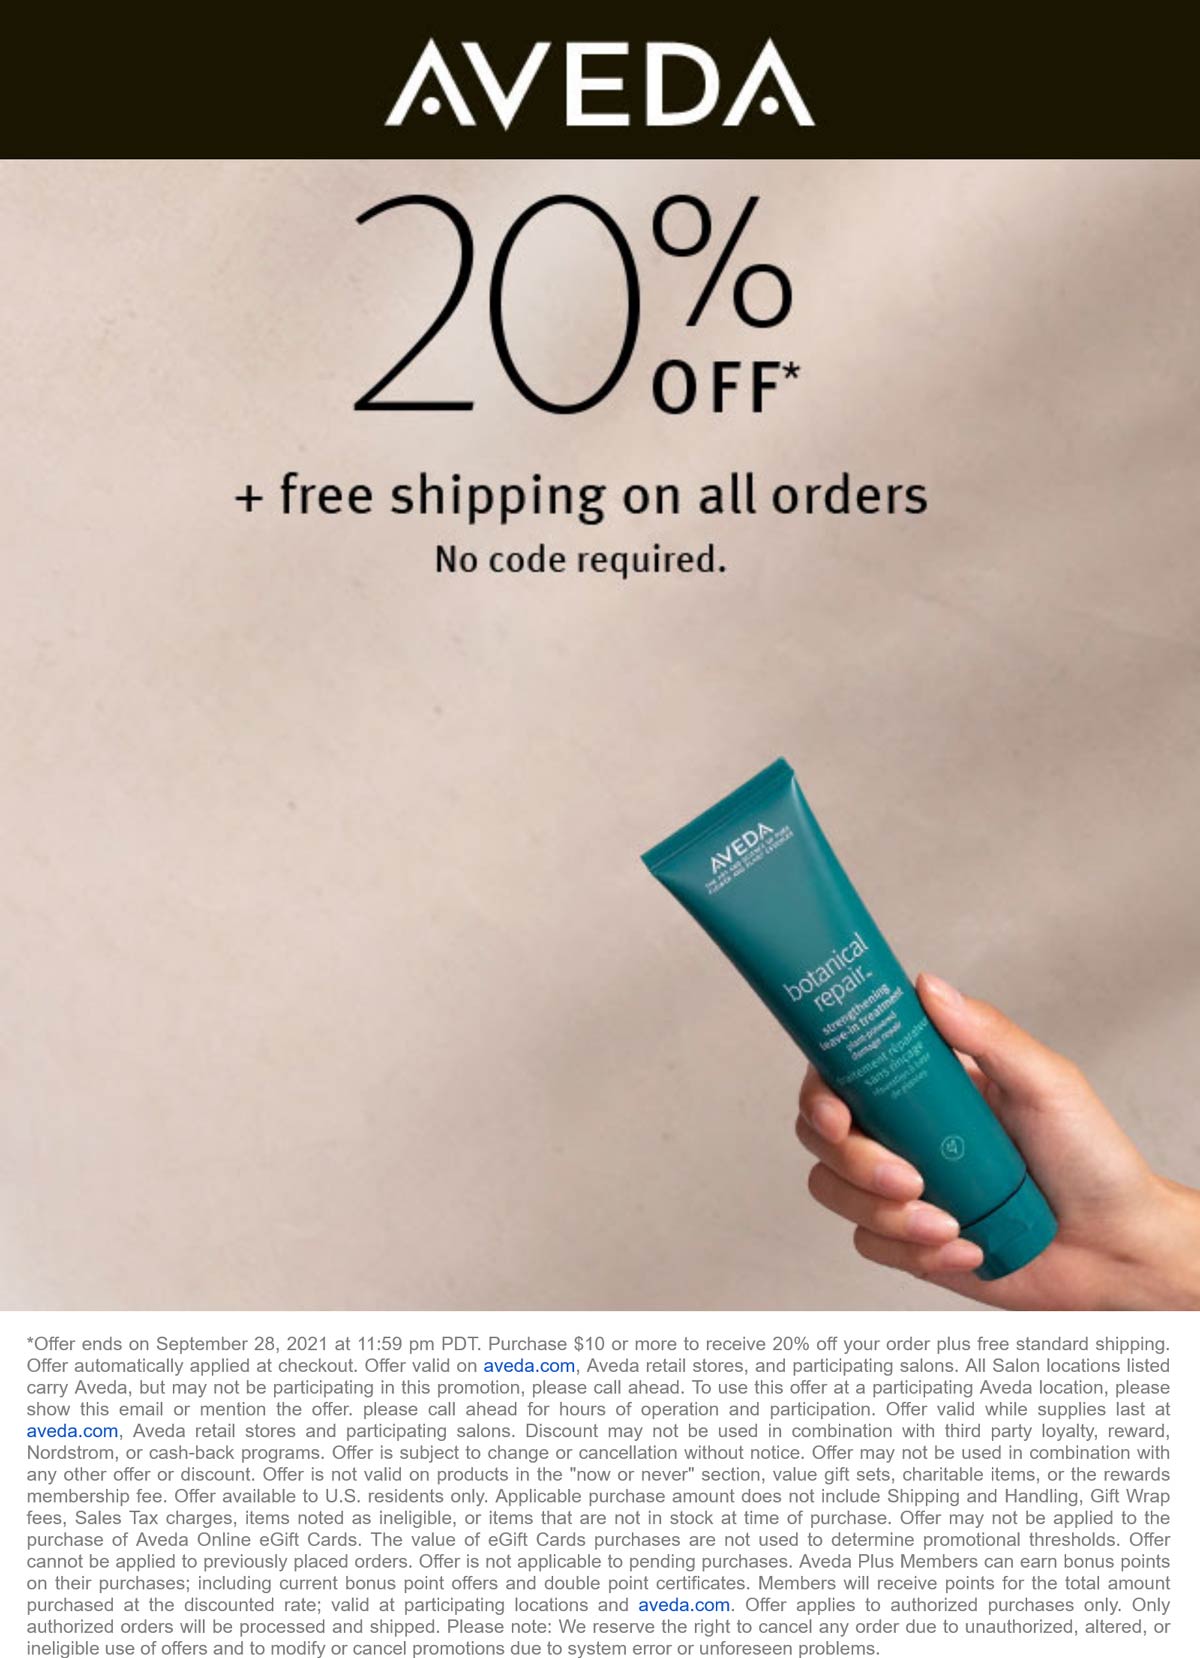 AVEDA stores Coupon  20% off today at AVEDA, ditto online #aveda 